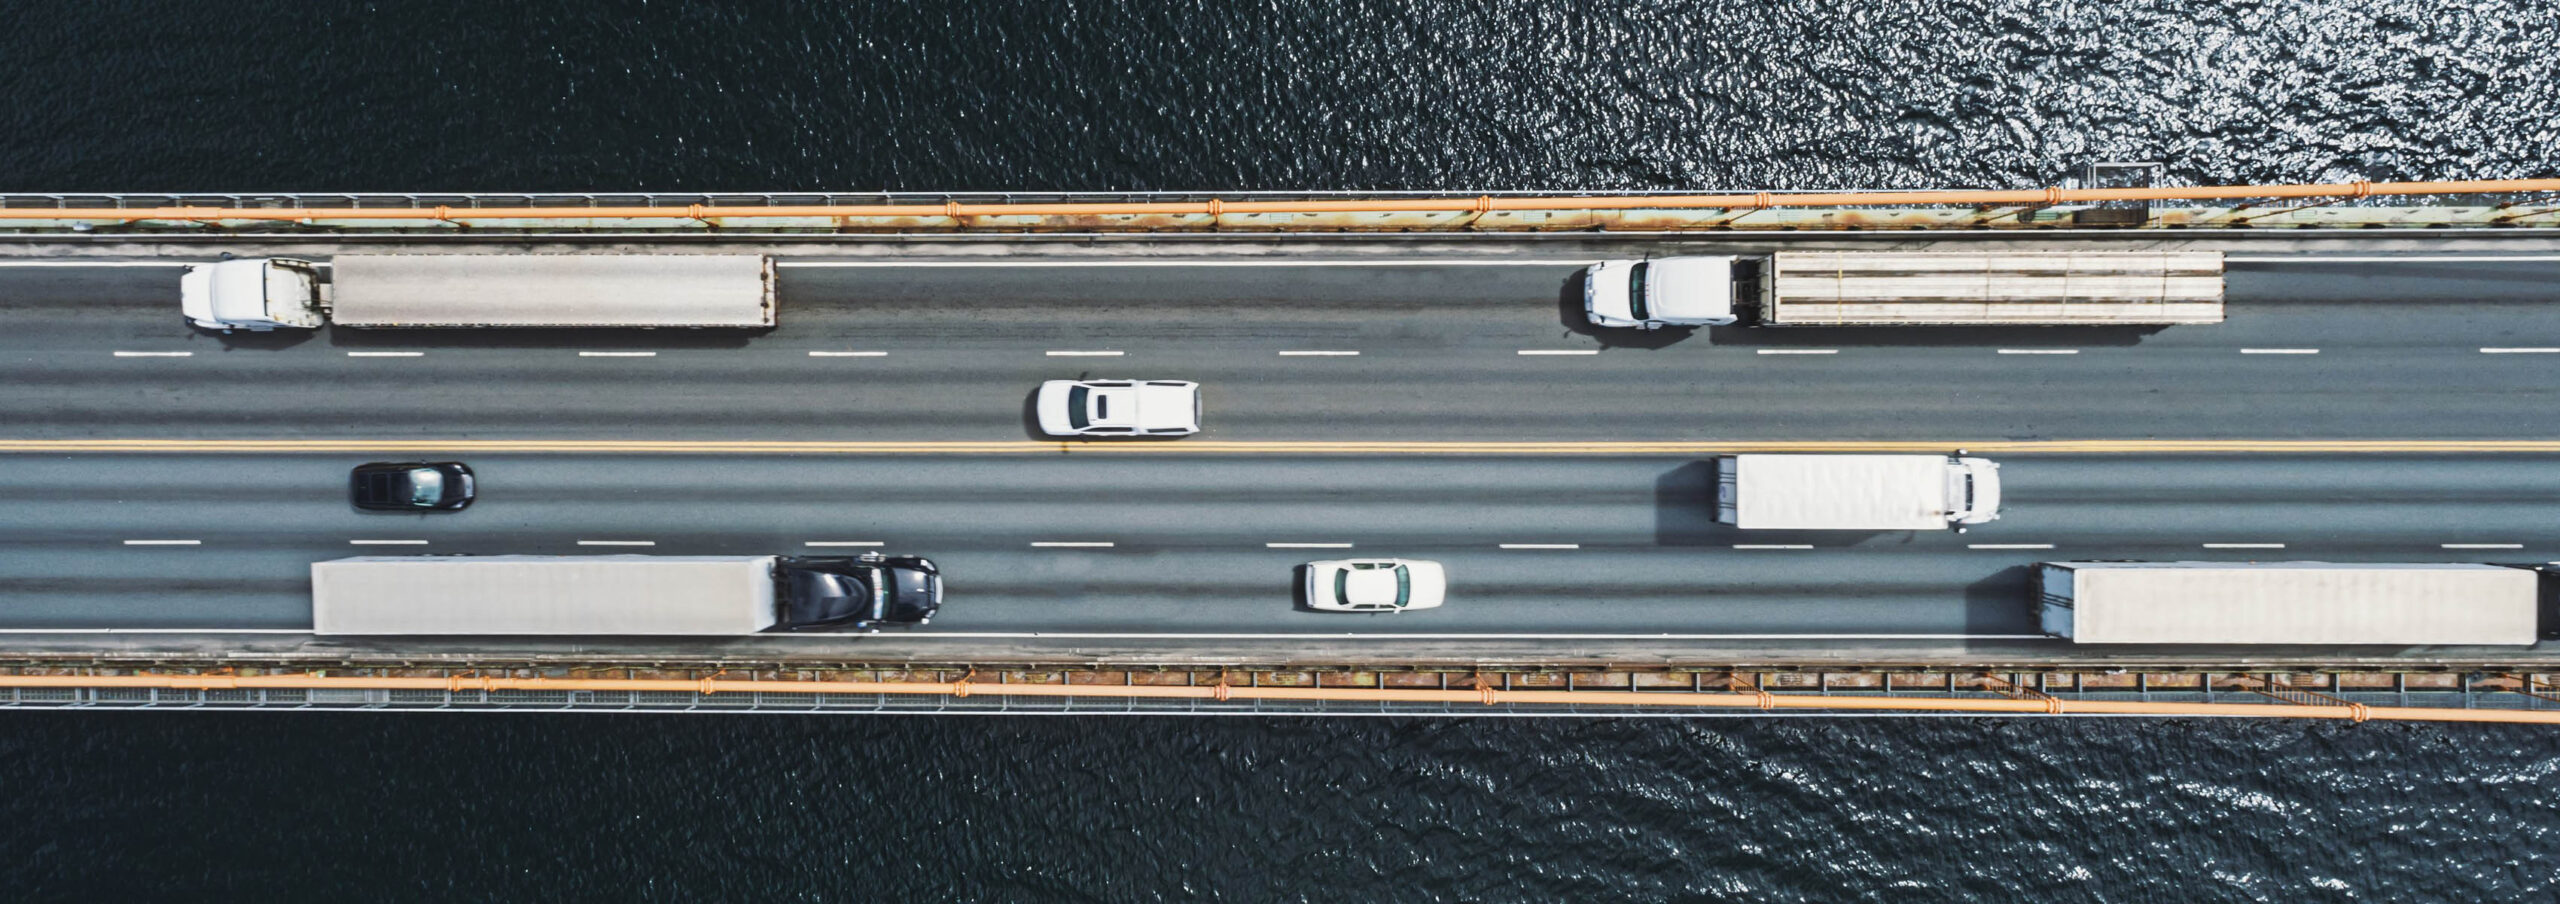 Overhead image of busy highway with trucks and cars on bridge over water.